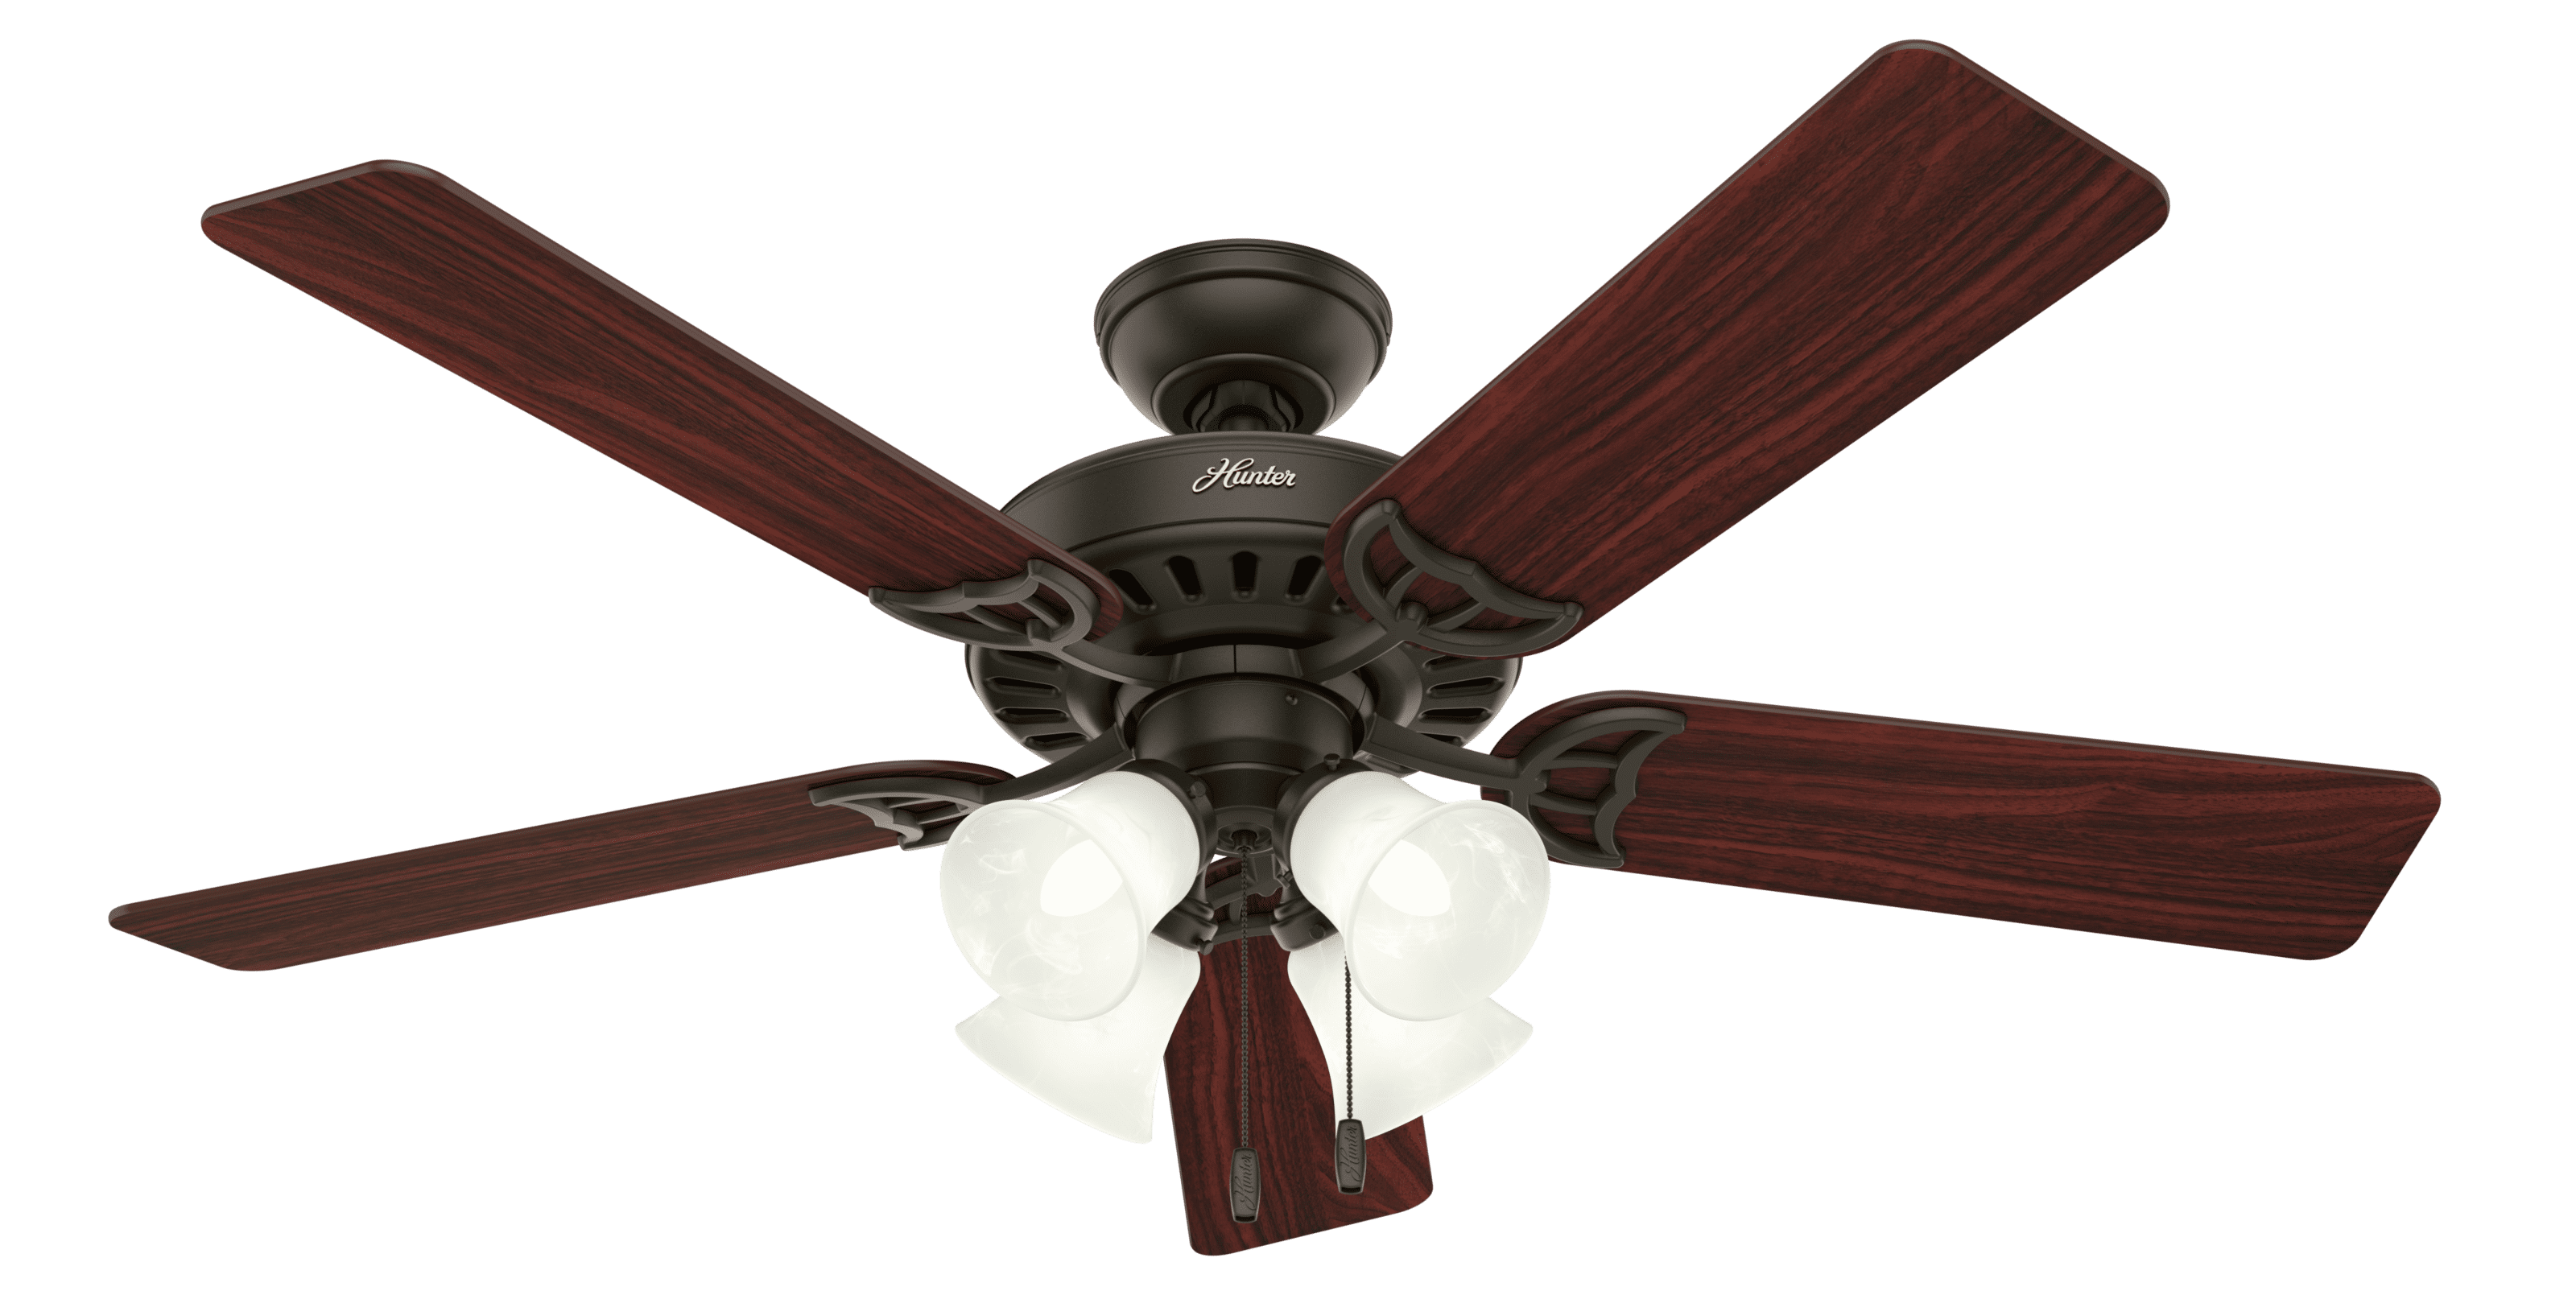 Hunter Ceiling Lights / Hunter 50416 Indoor Bennett Ceiling Fan With Led Light Black Lamps Lighting Ceiling Fans Com Home Garden : I did have the ceiling fan and light working with the old switch but couldn't get the hunter switch this fan/light control switch has red, black, blue, and green.